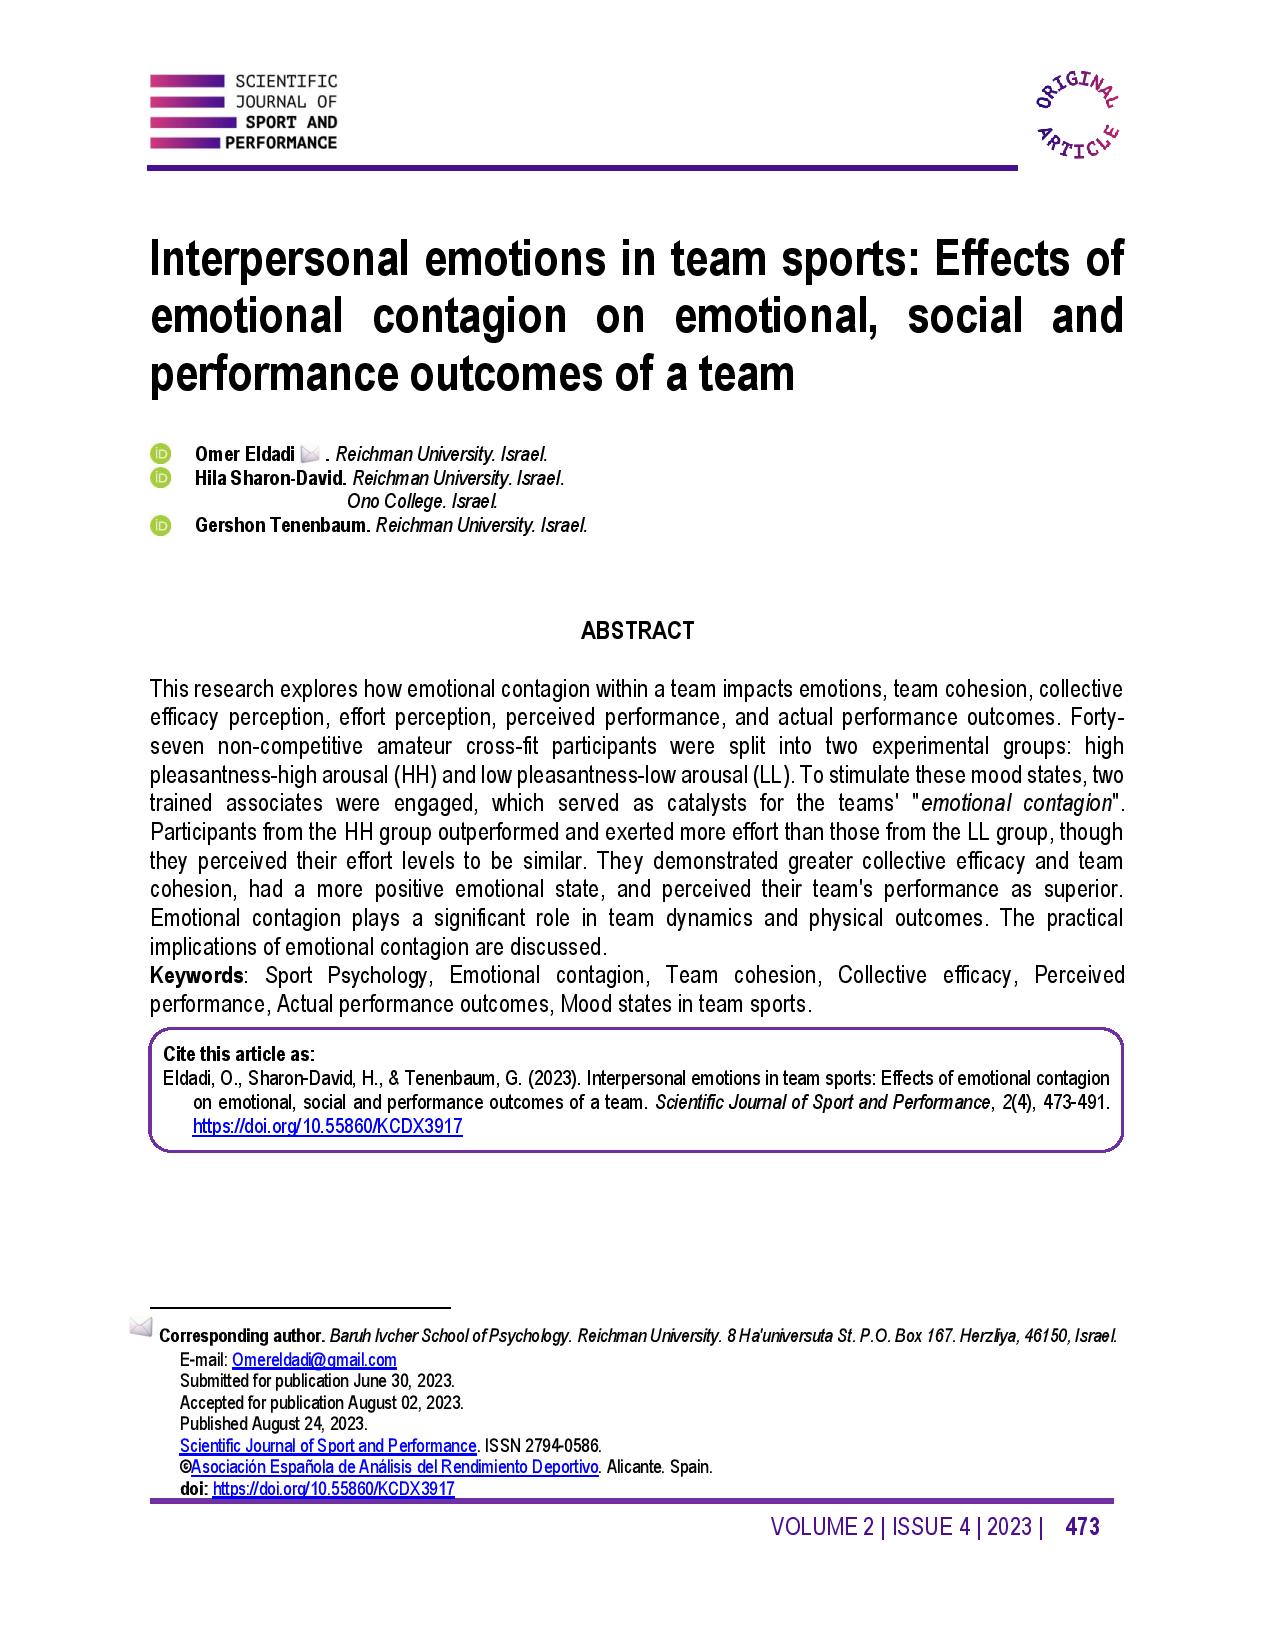 Interpersonal emotions in team sports: Effects of emotional contagion on emotional, social and performance outcomes of a team